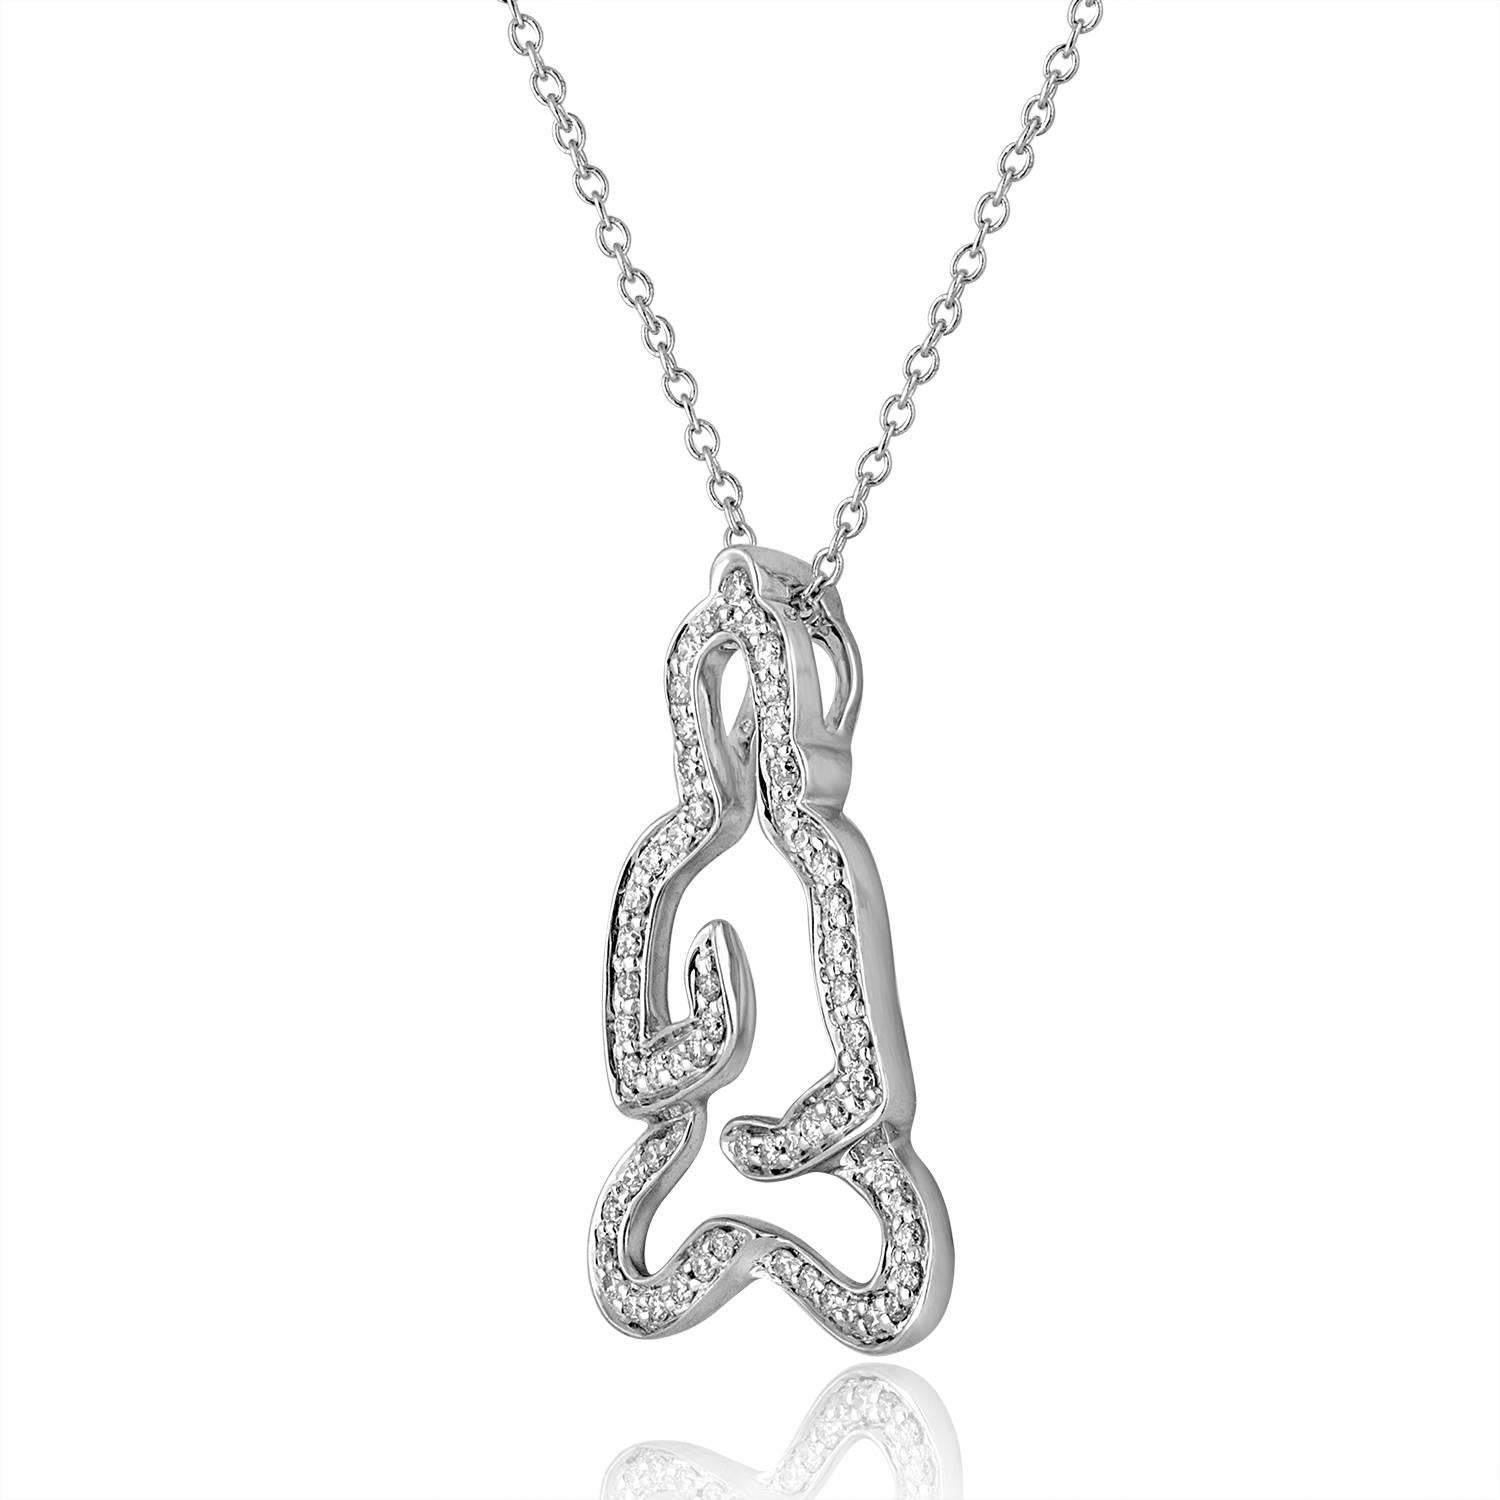 Beautiful Buddha Pendant on Chain.
The Buddha is 18K White Gold
There are 0.31 Carat F/G VS/SI Diamonds.
The pendant measures 1